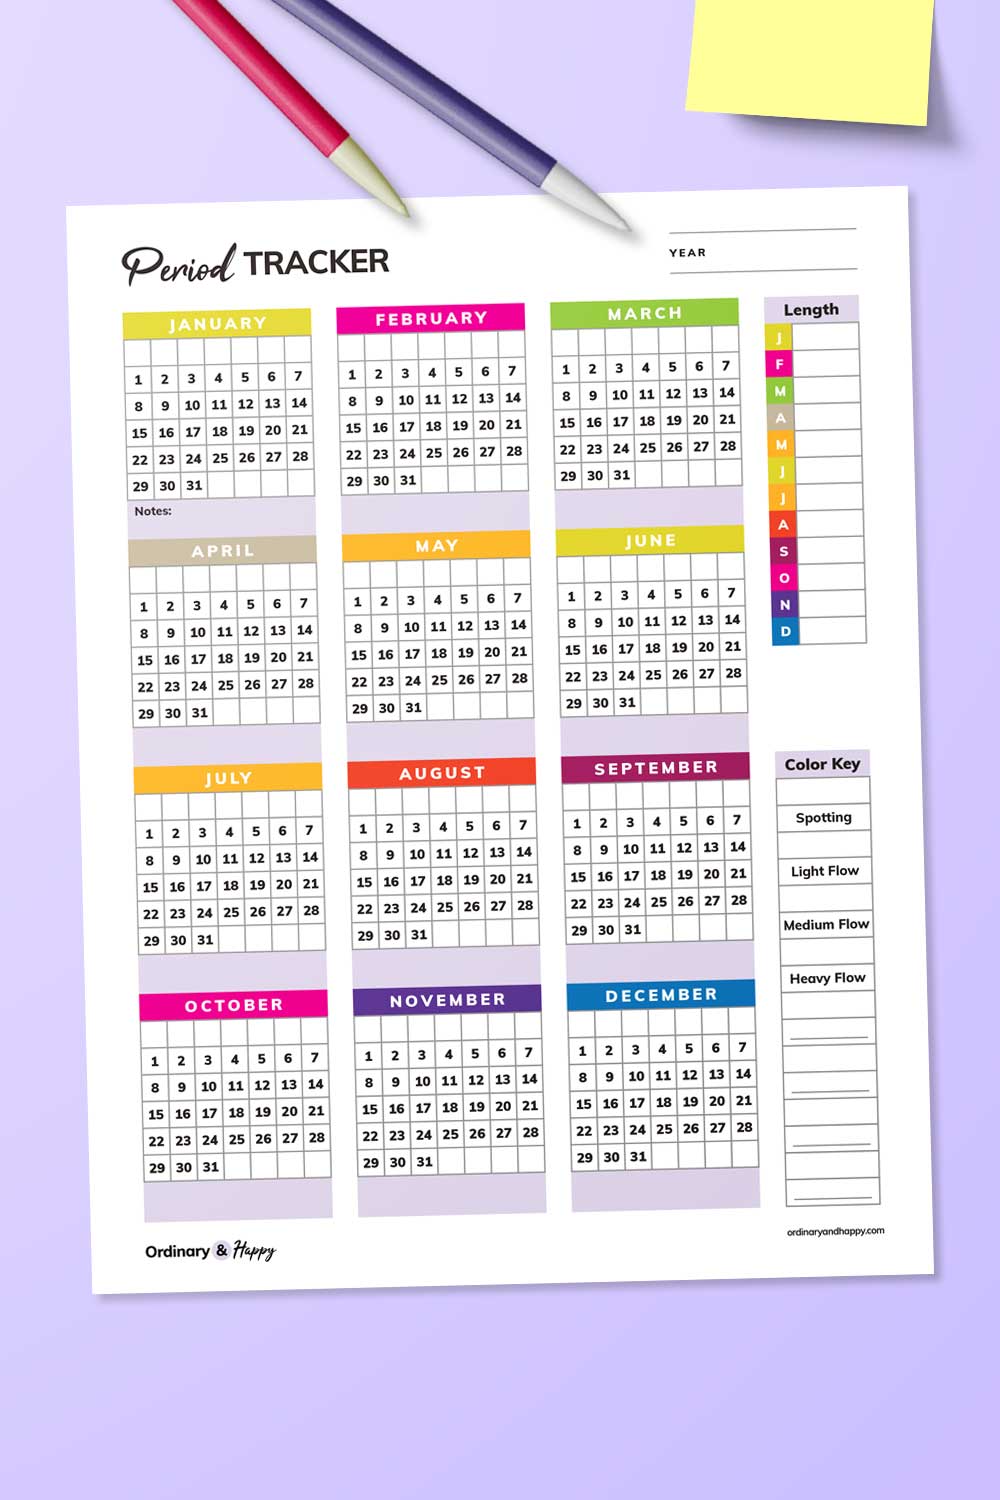 4-period-tracker-printables-to-easily-track-your-cycle-free-and-premium-ordinary-and-happy